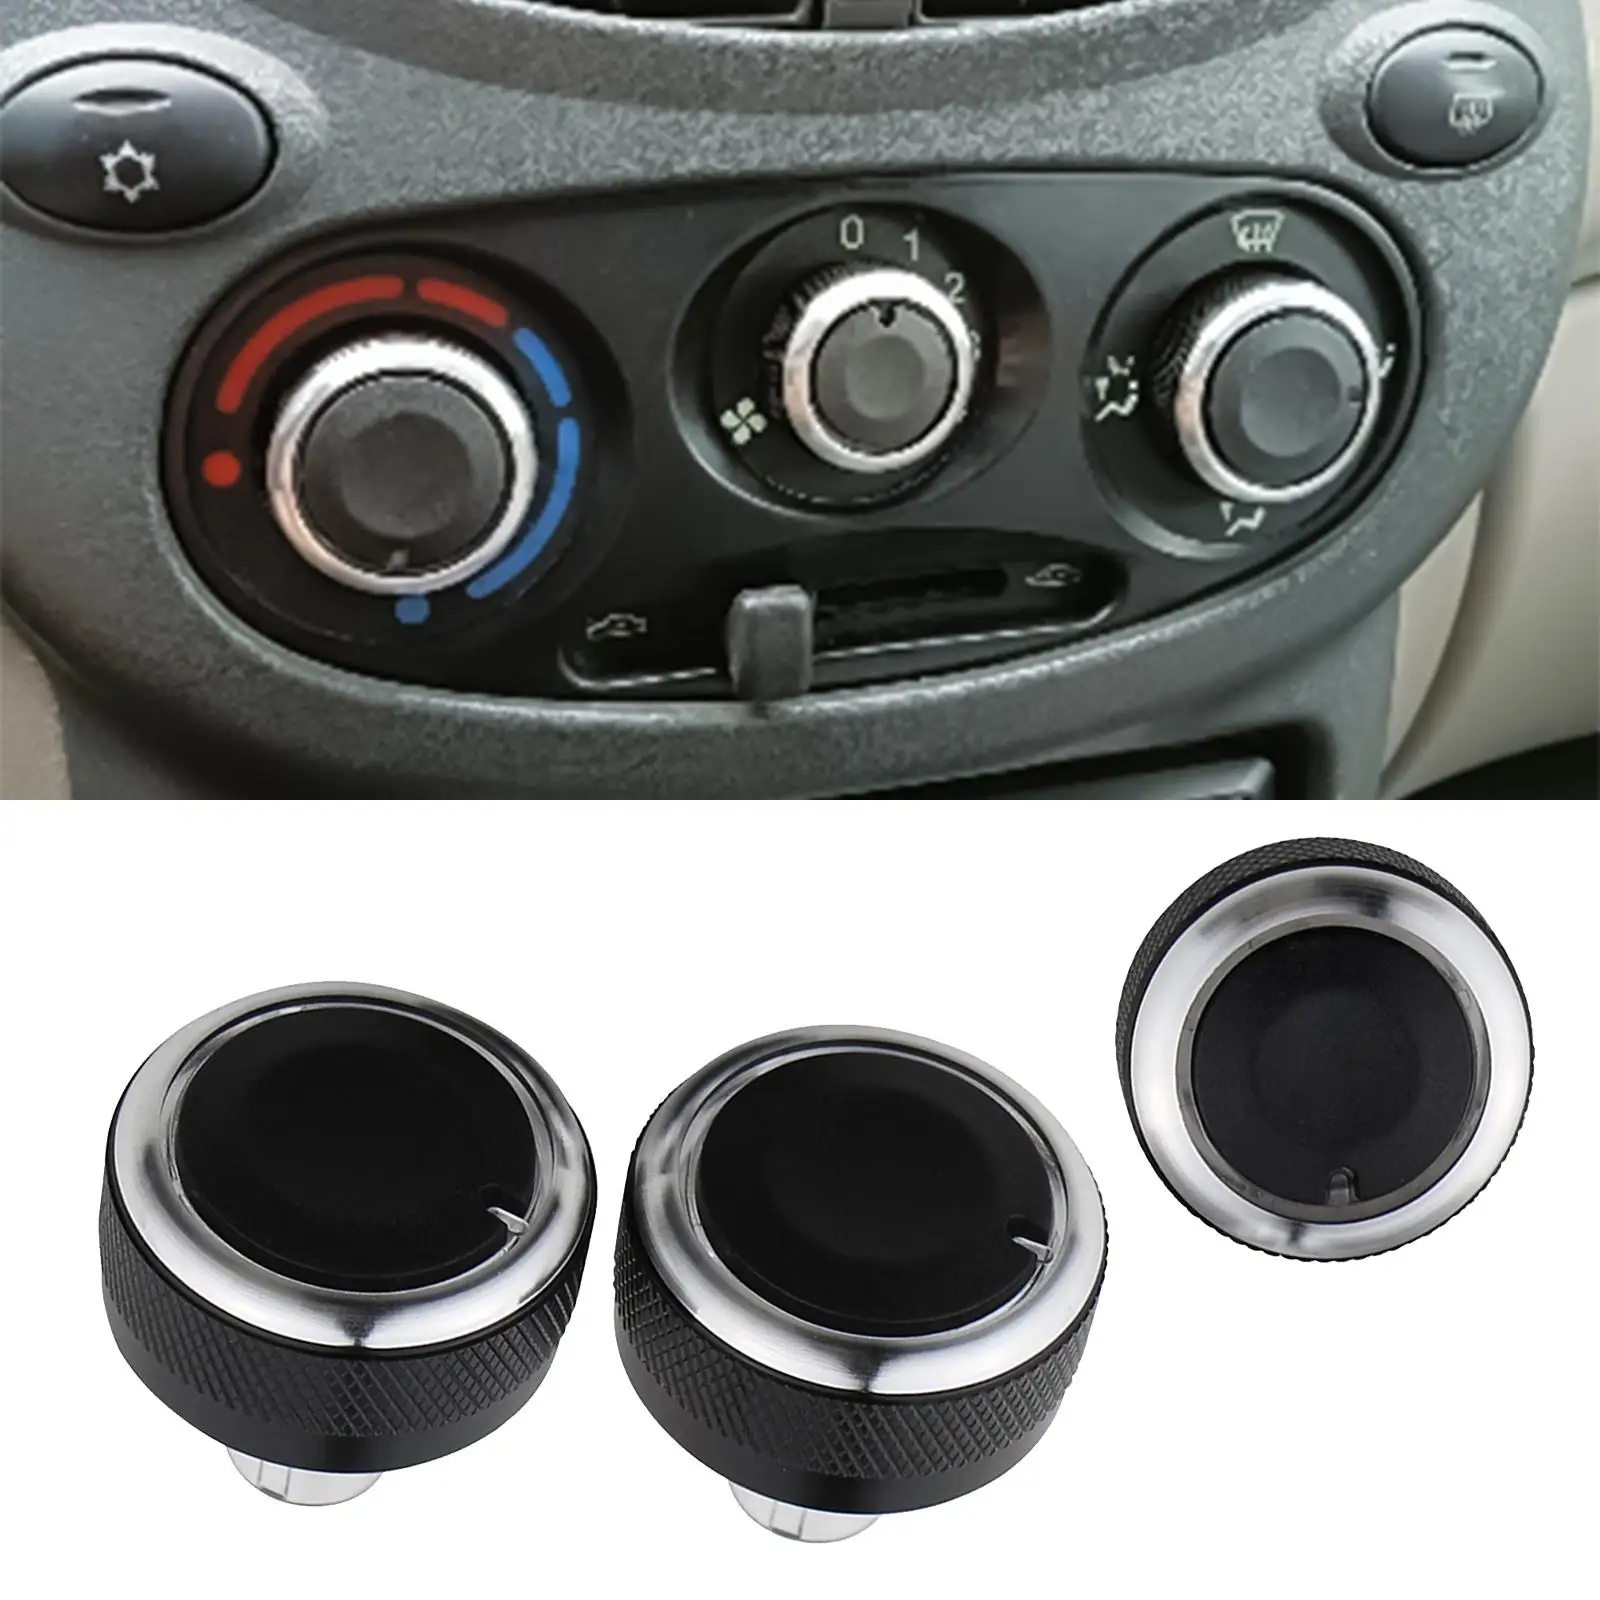 Car Air Conditioner Knob High Performance Replacement Parts for Granta